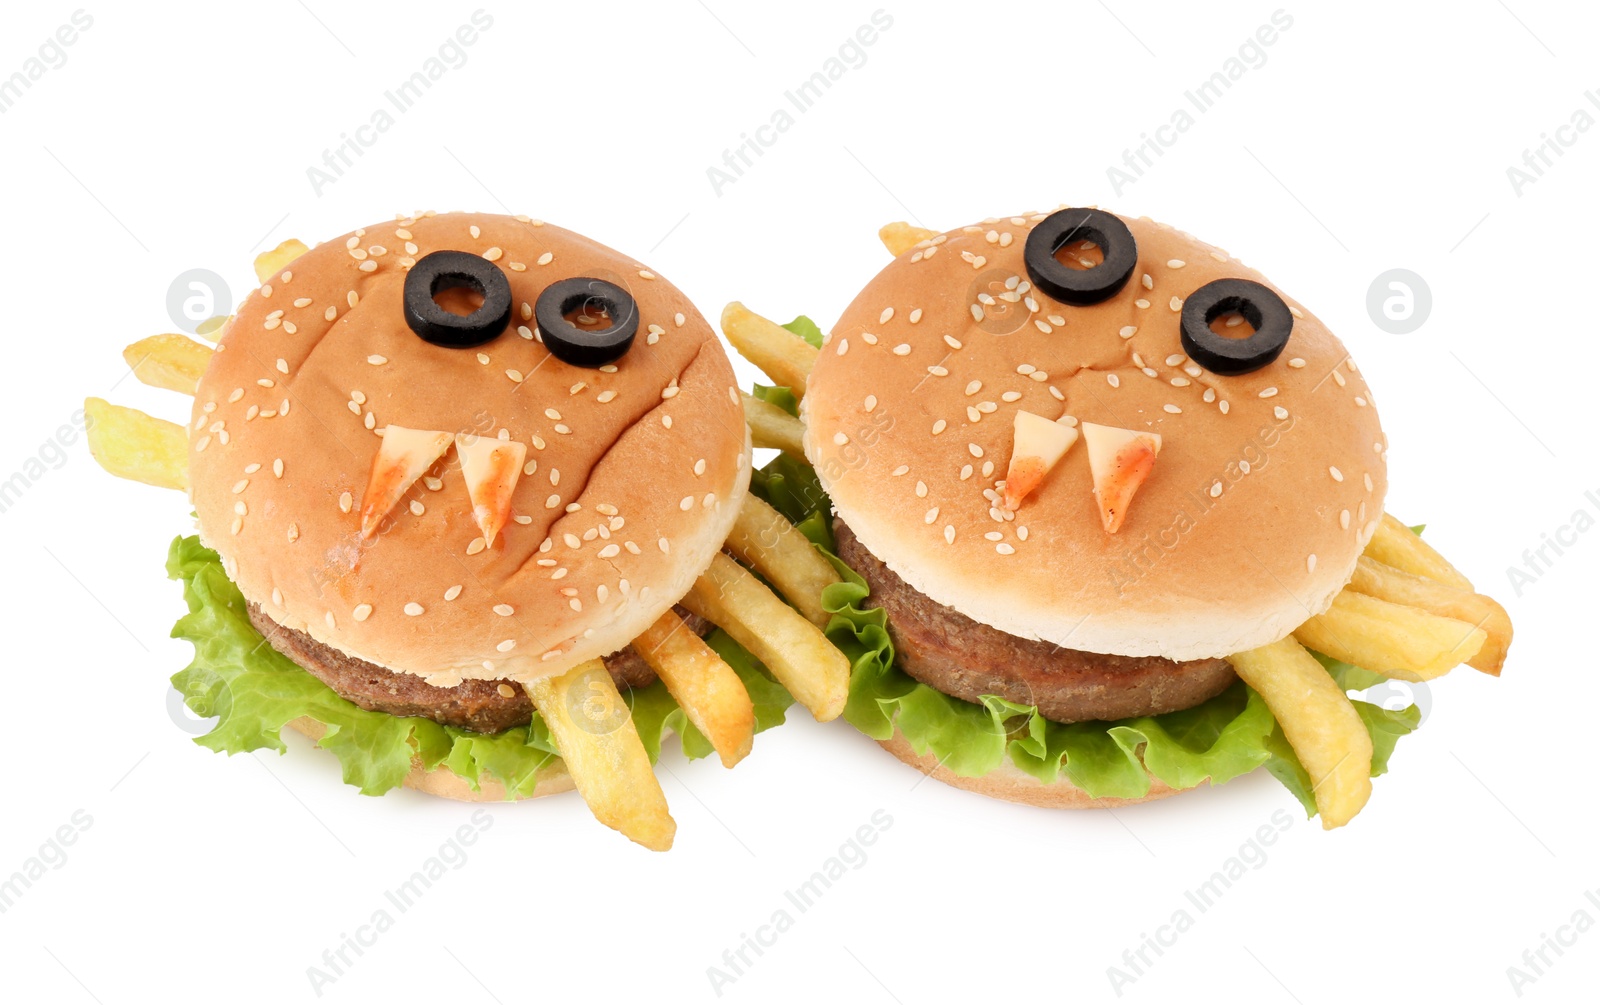 Photo of Tasty monster sandwiches for Halloween party isolated on white